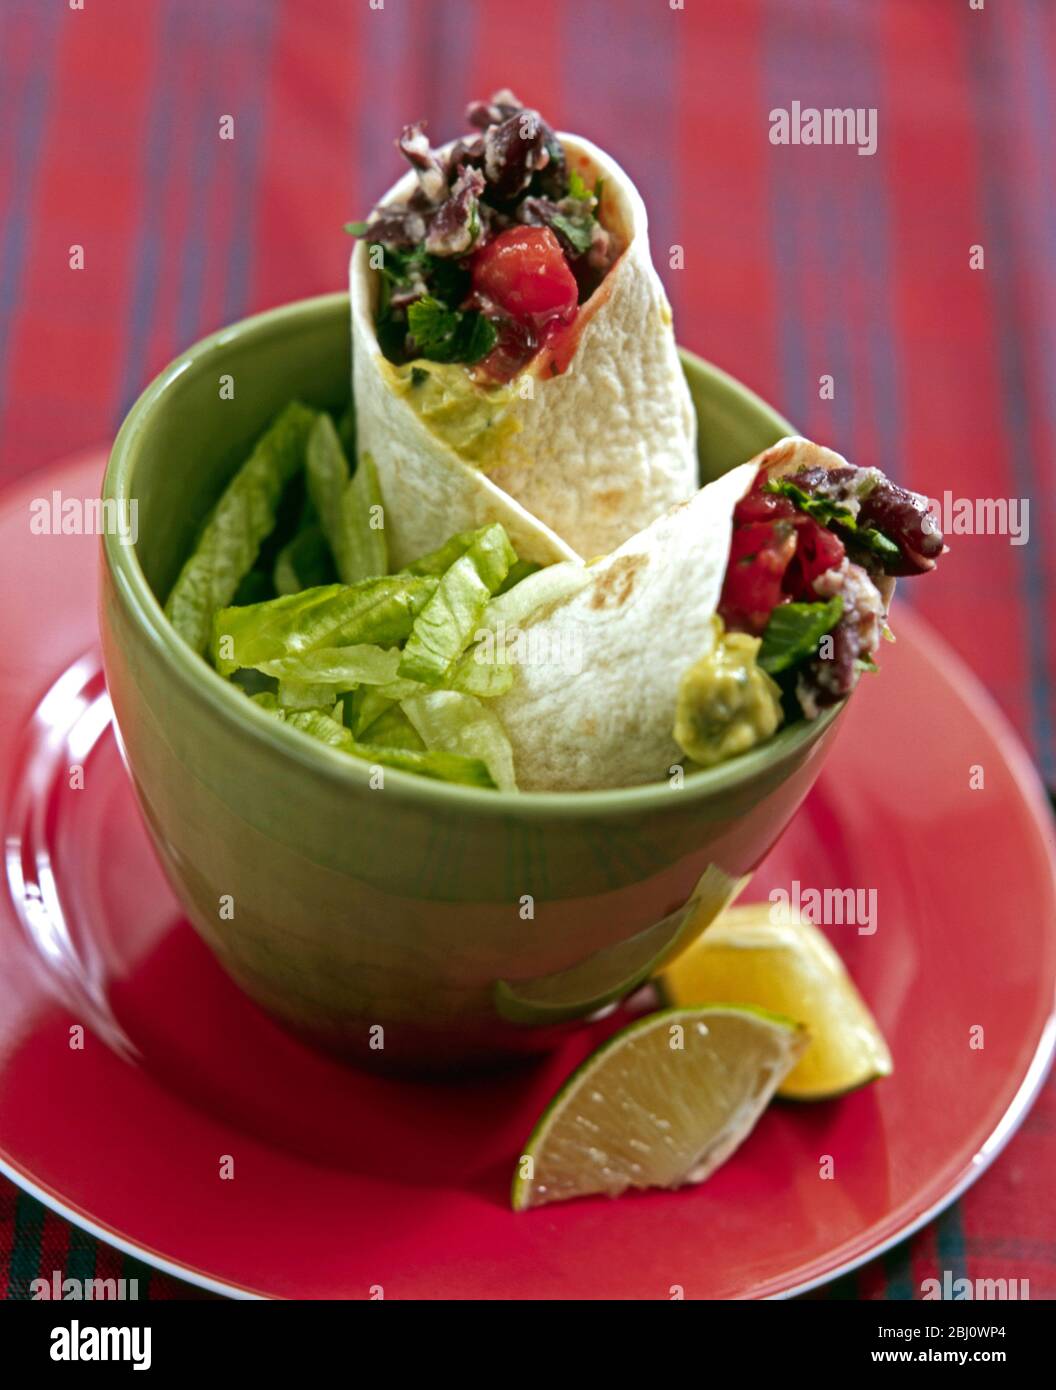 Light lunch of chilli beans mixture wrapped in soft tortillas with salad and lemon wedges in green bowl - Stock Photo